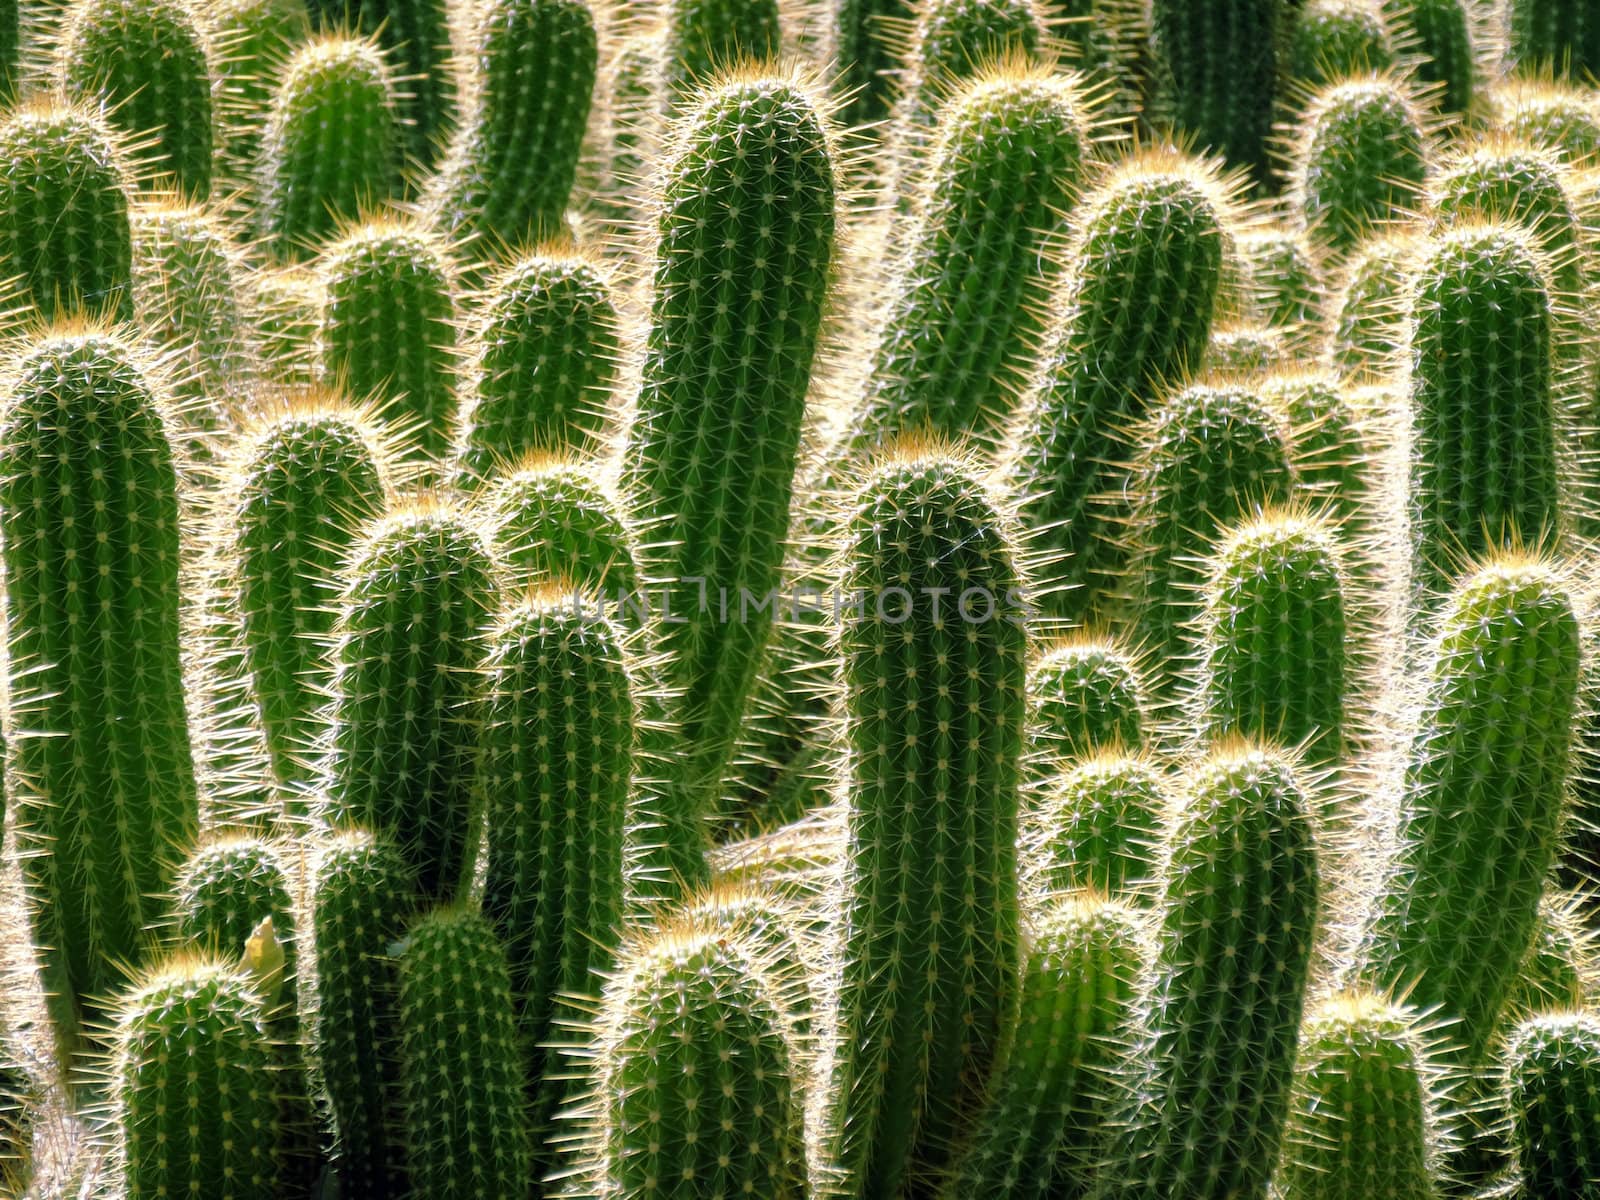 Several cactus with bright spines by ytjo